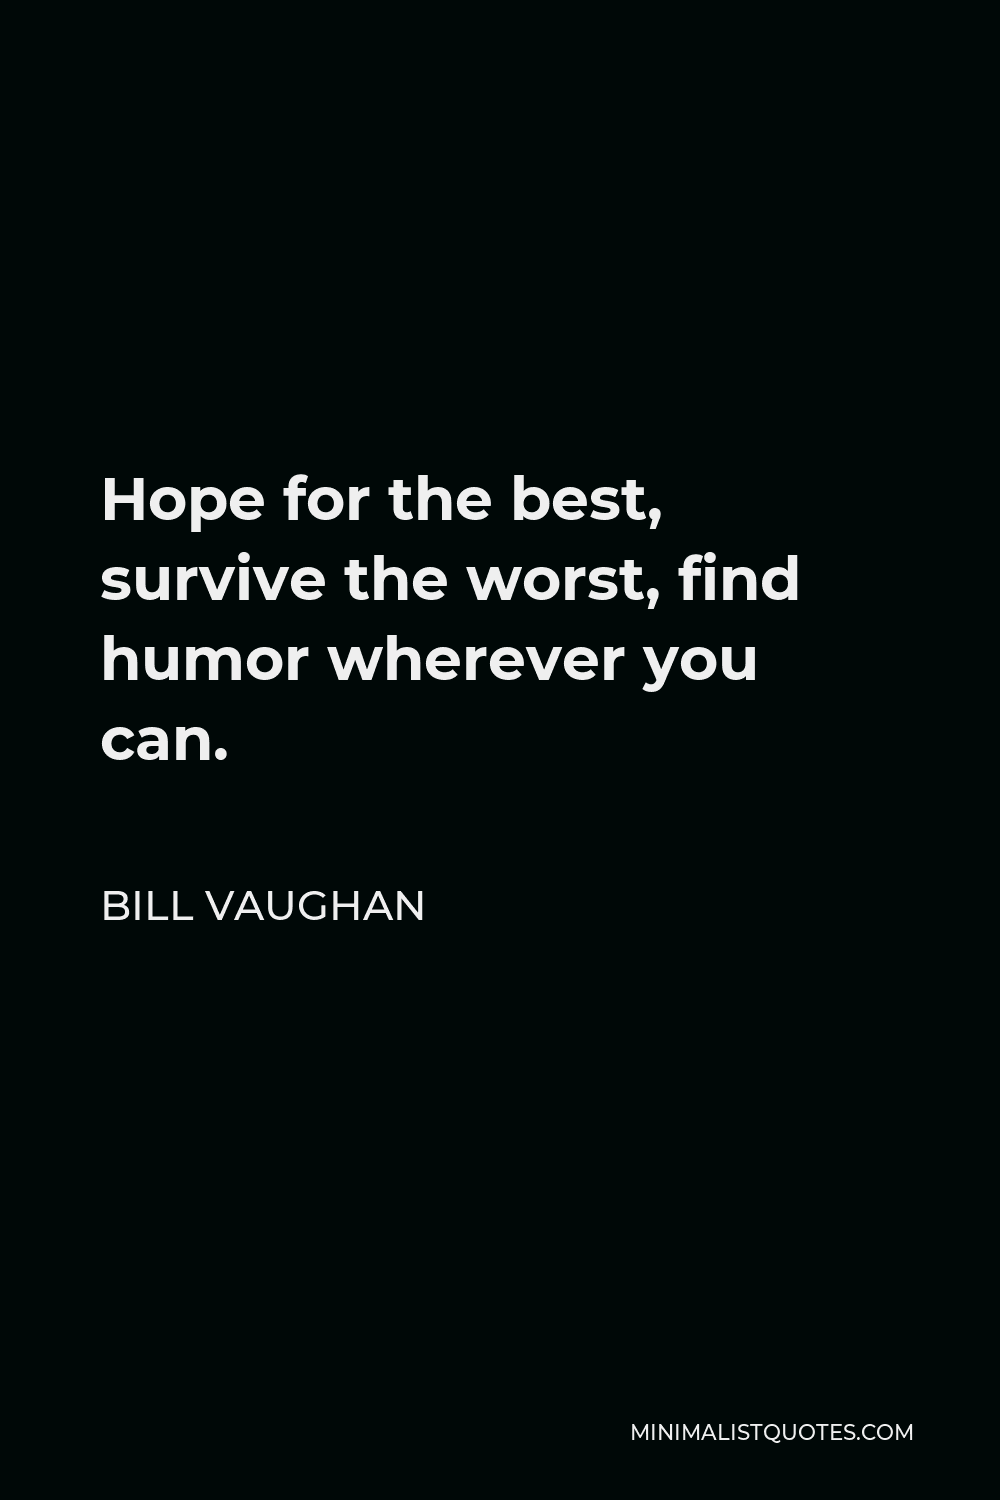 Bill Vaughan Quote - Hope for the best, survive the worst, find humor wherever you can.